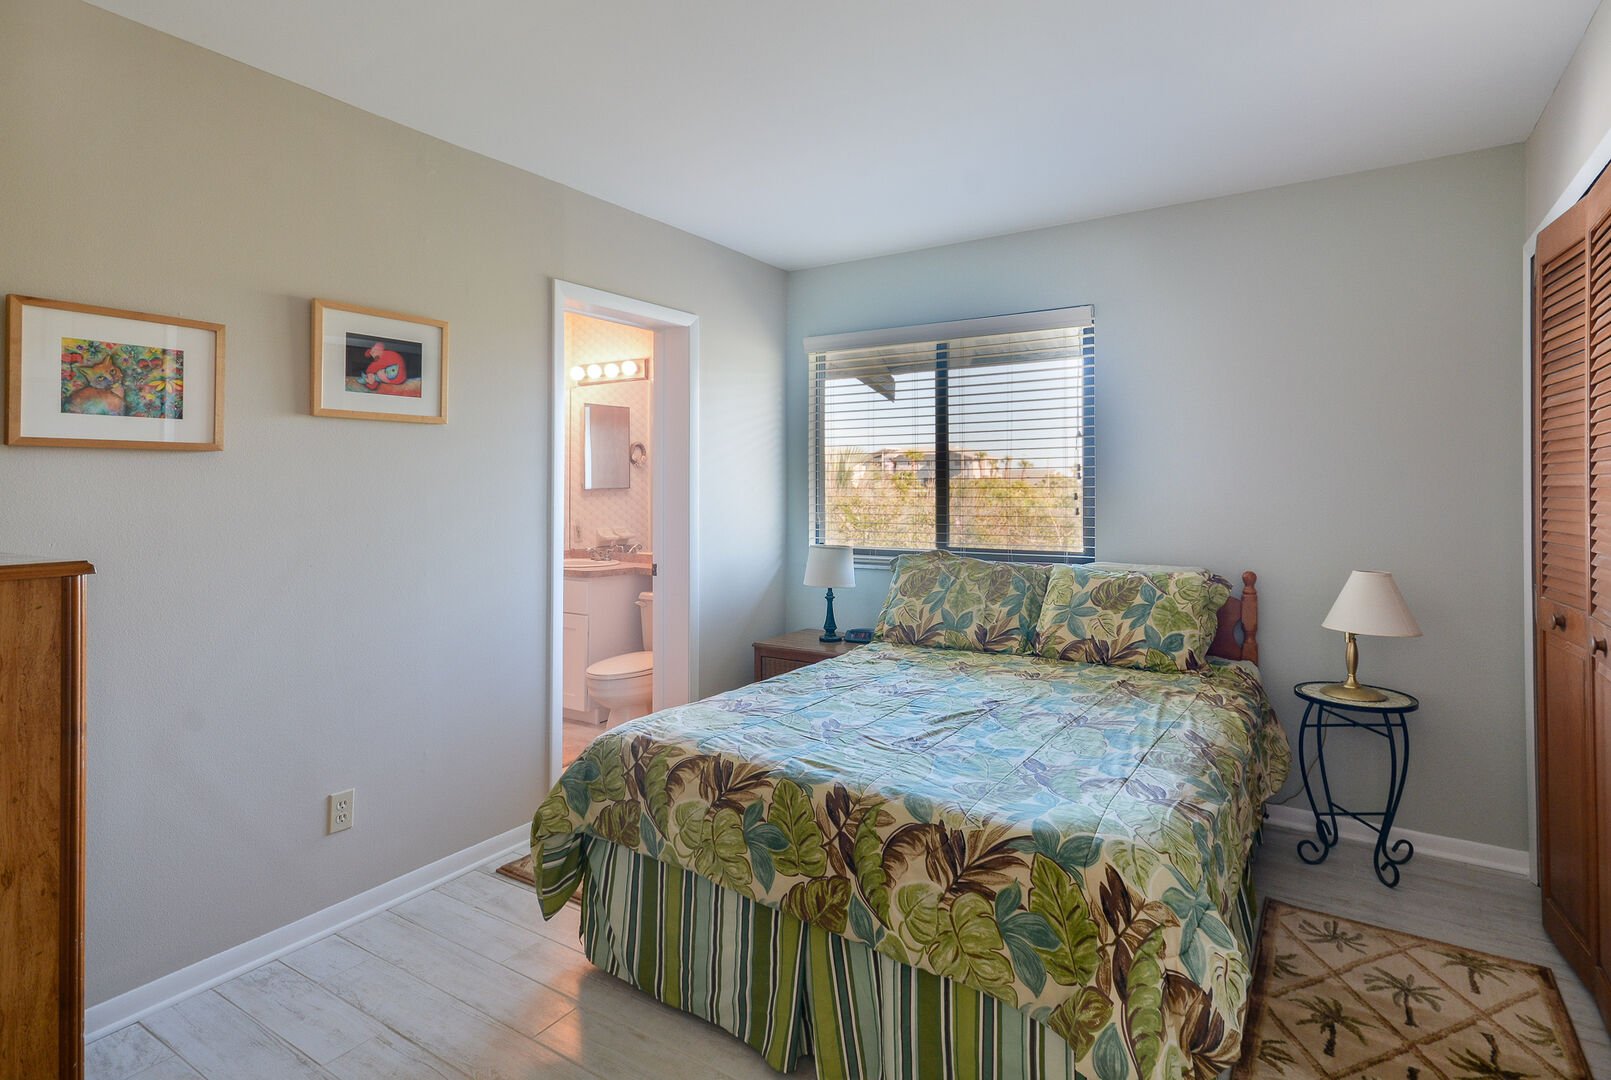 2nd bedroom features a queen size bed, flat screen HDTV and more.